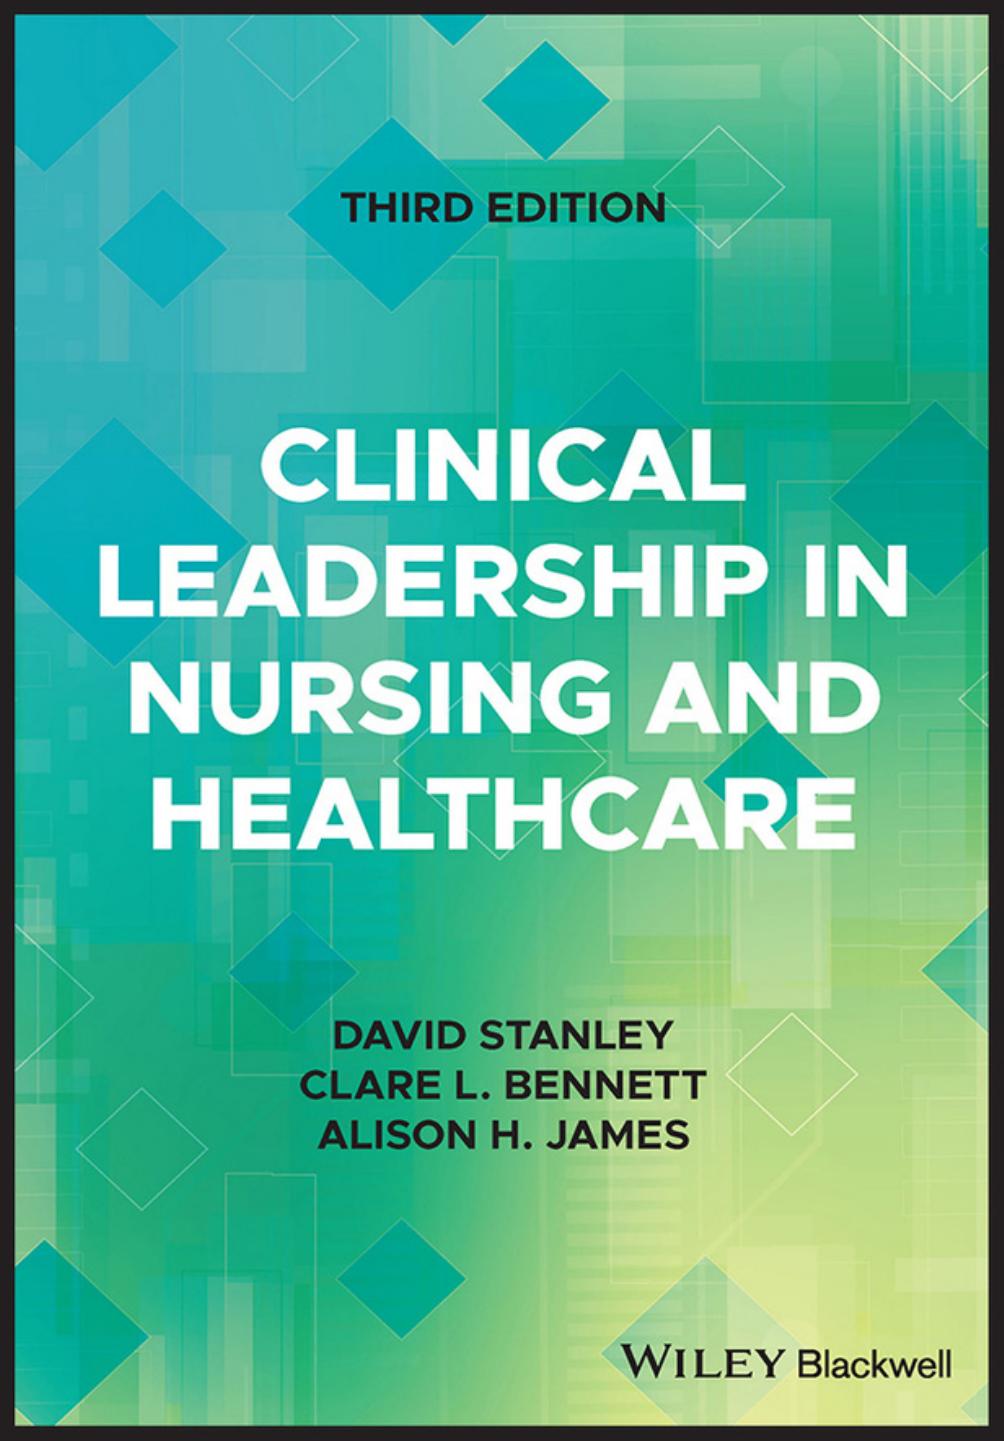 Clinical Leadership in Nursing and Healthcare